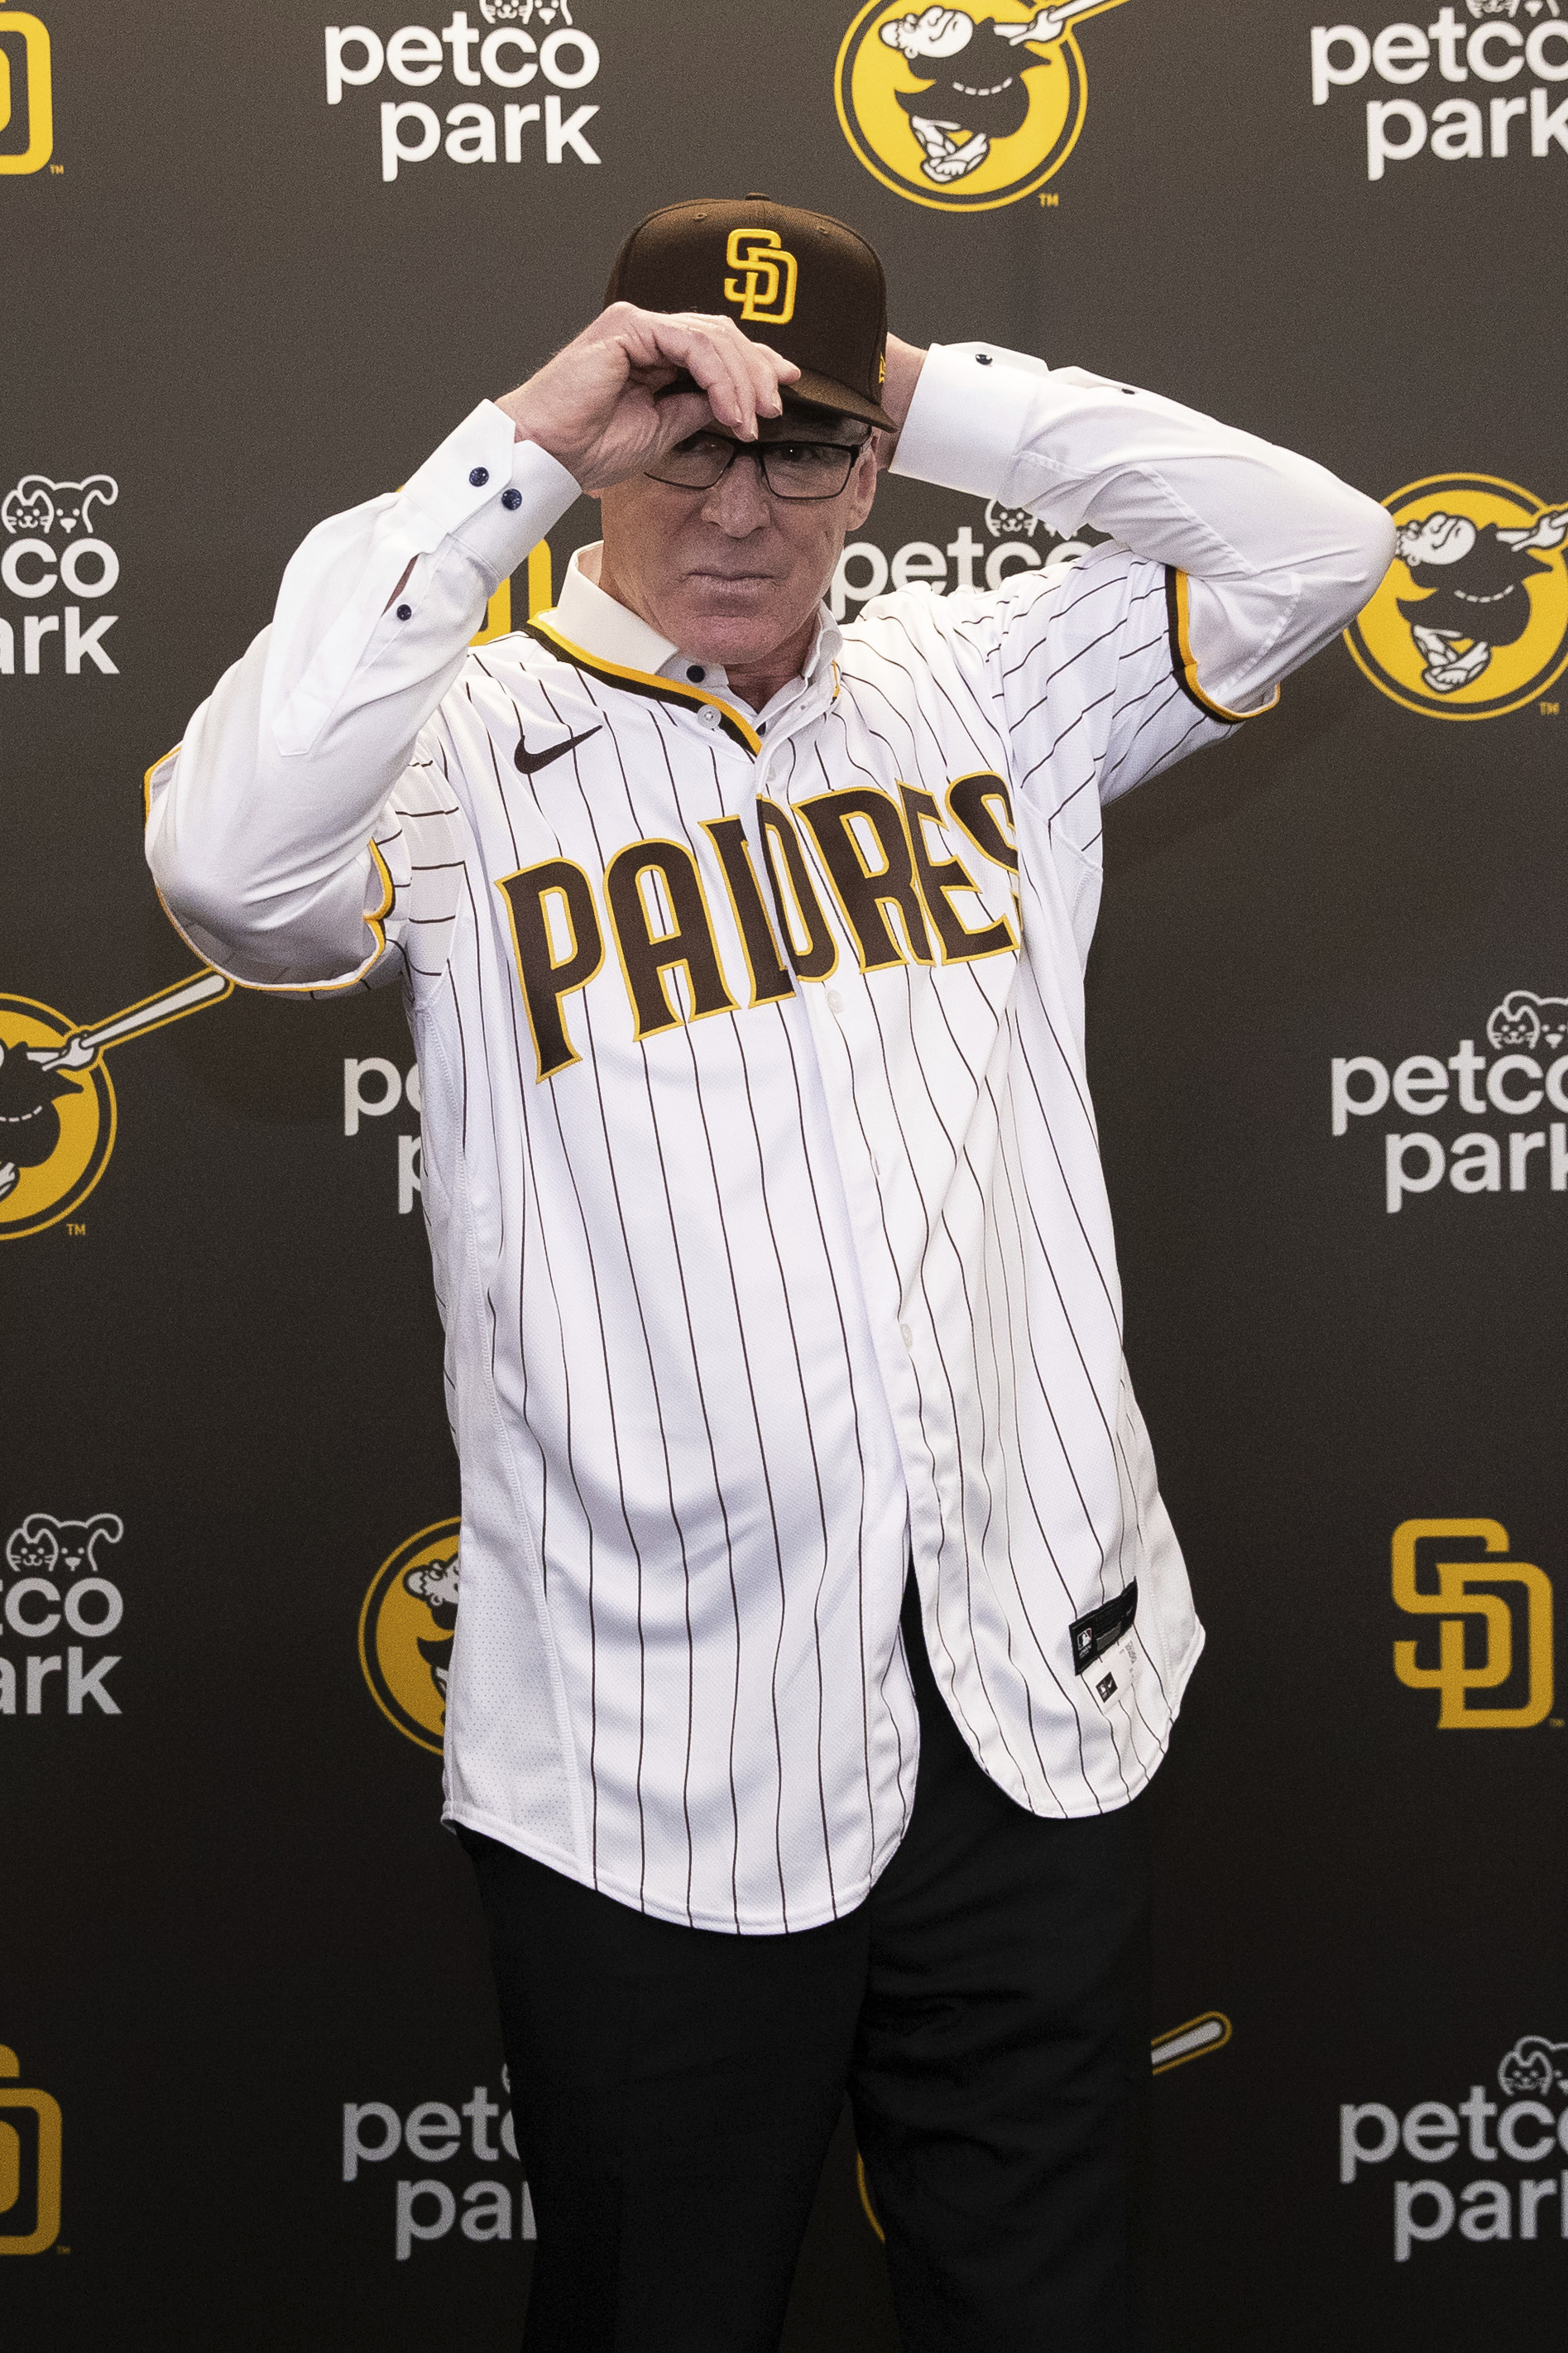 Padres to unveil Brown and Yellow Uniforms this Fall : r/baseball